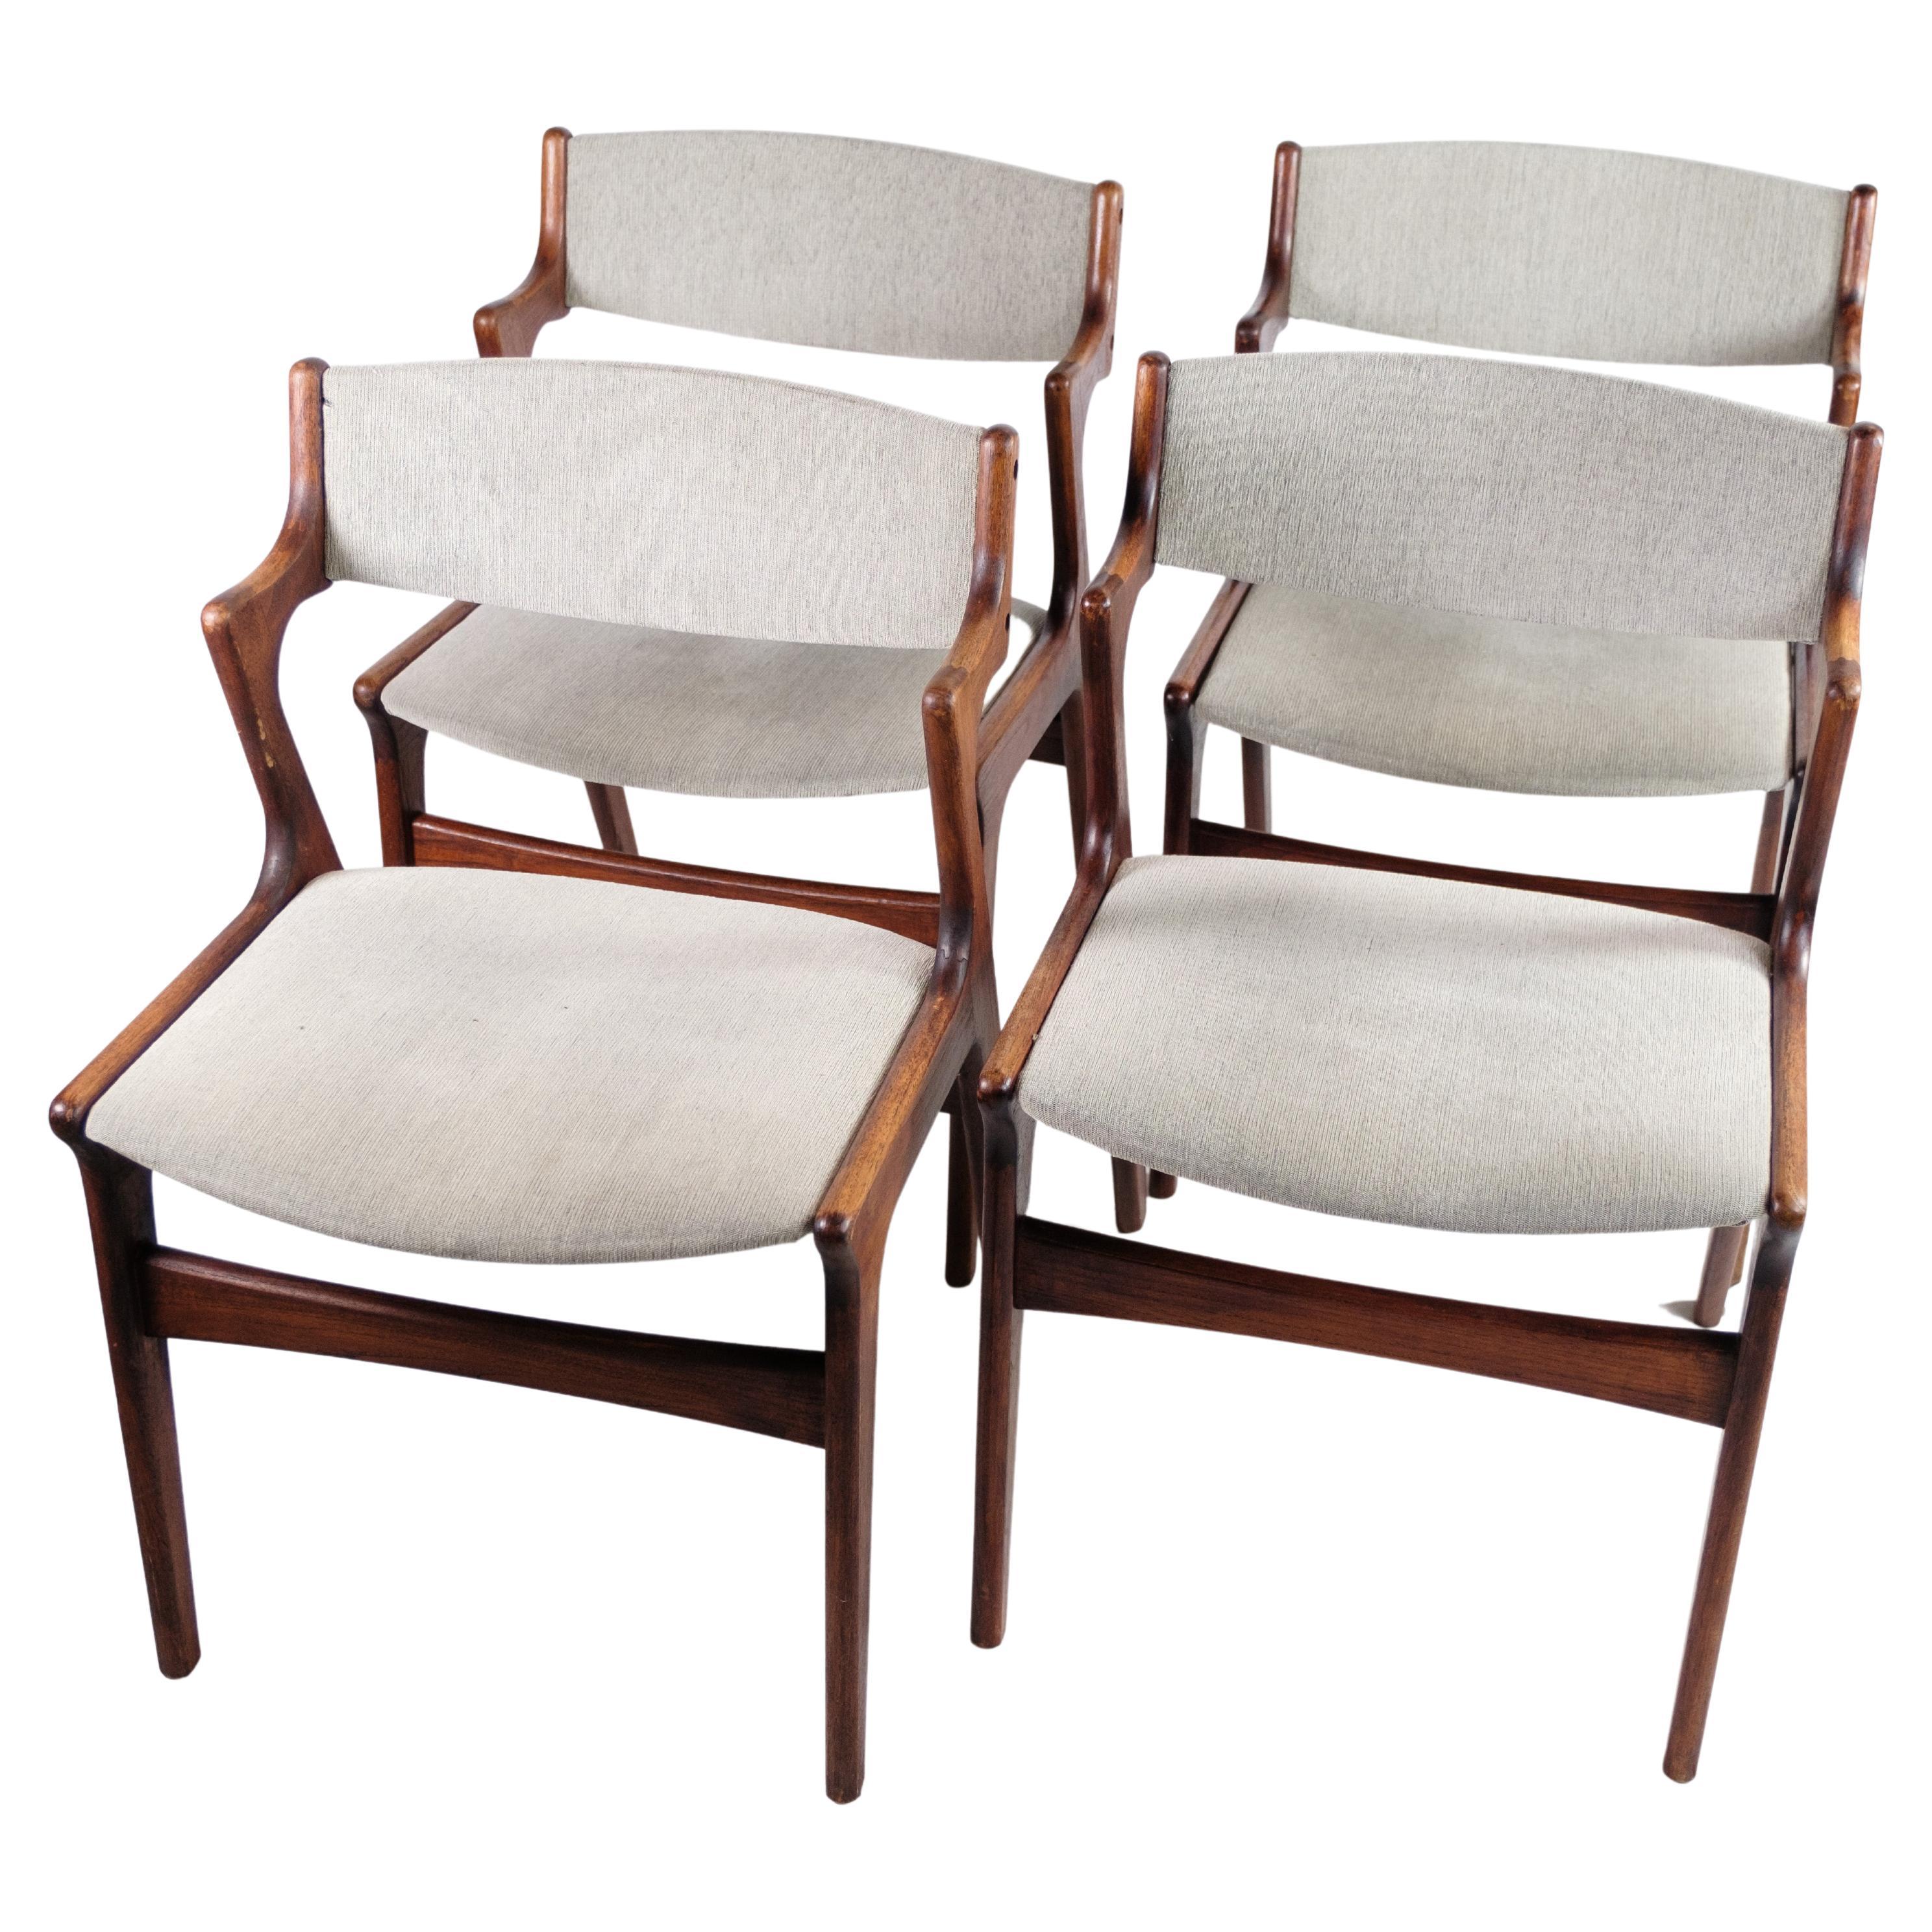 Set of 4 Dining Chairs, Teak, Nova Furniture, 1960s For Sale